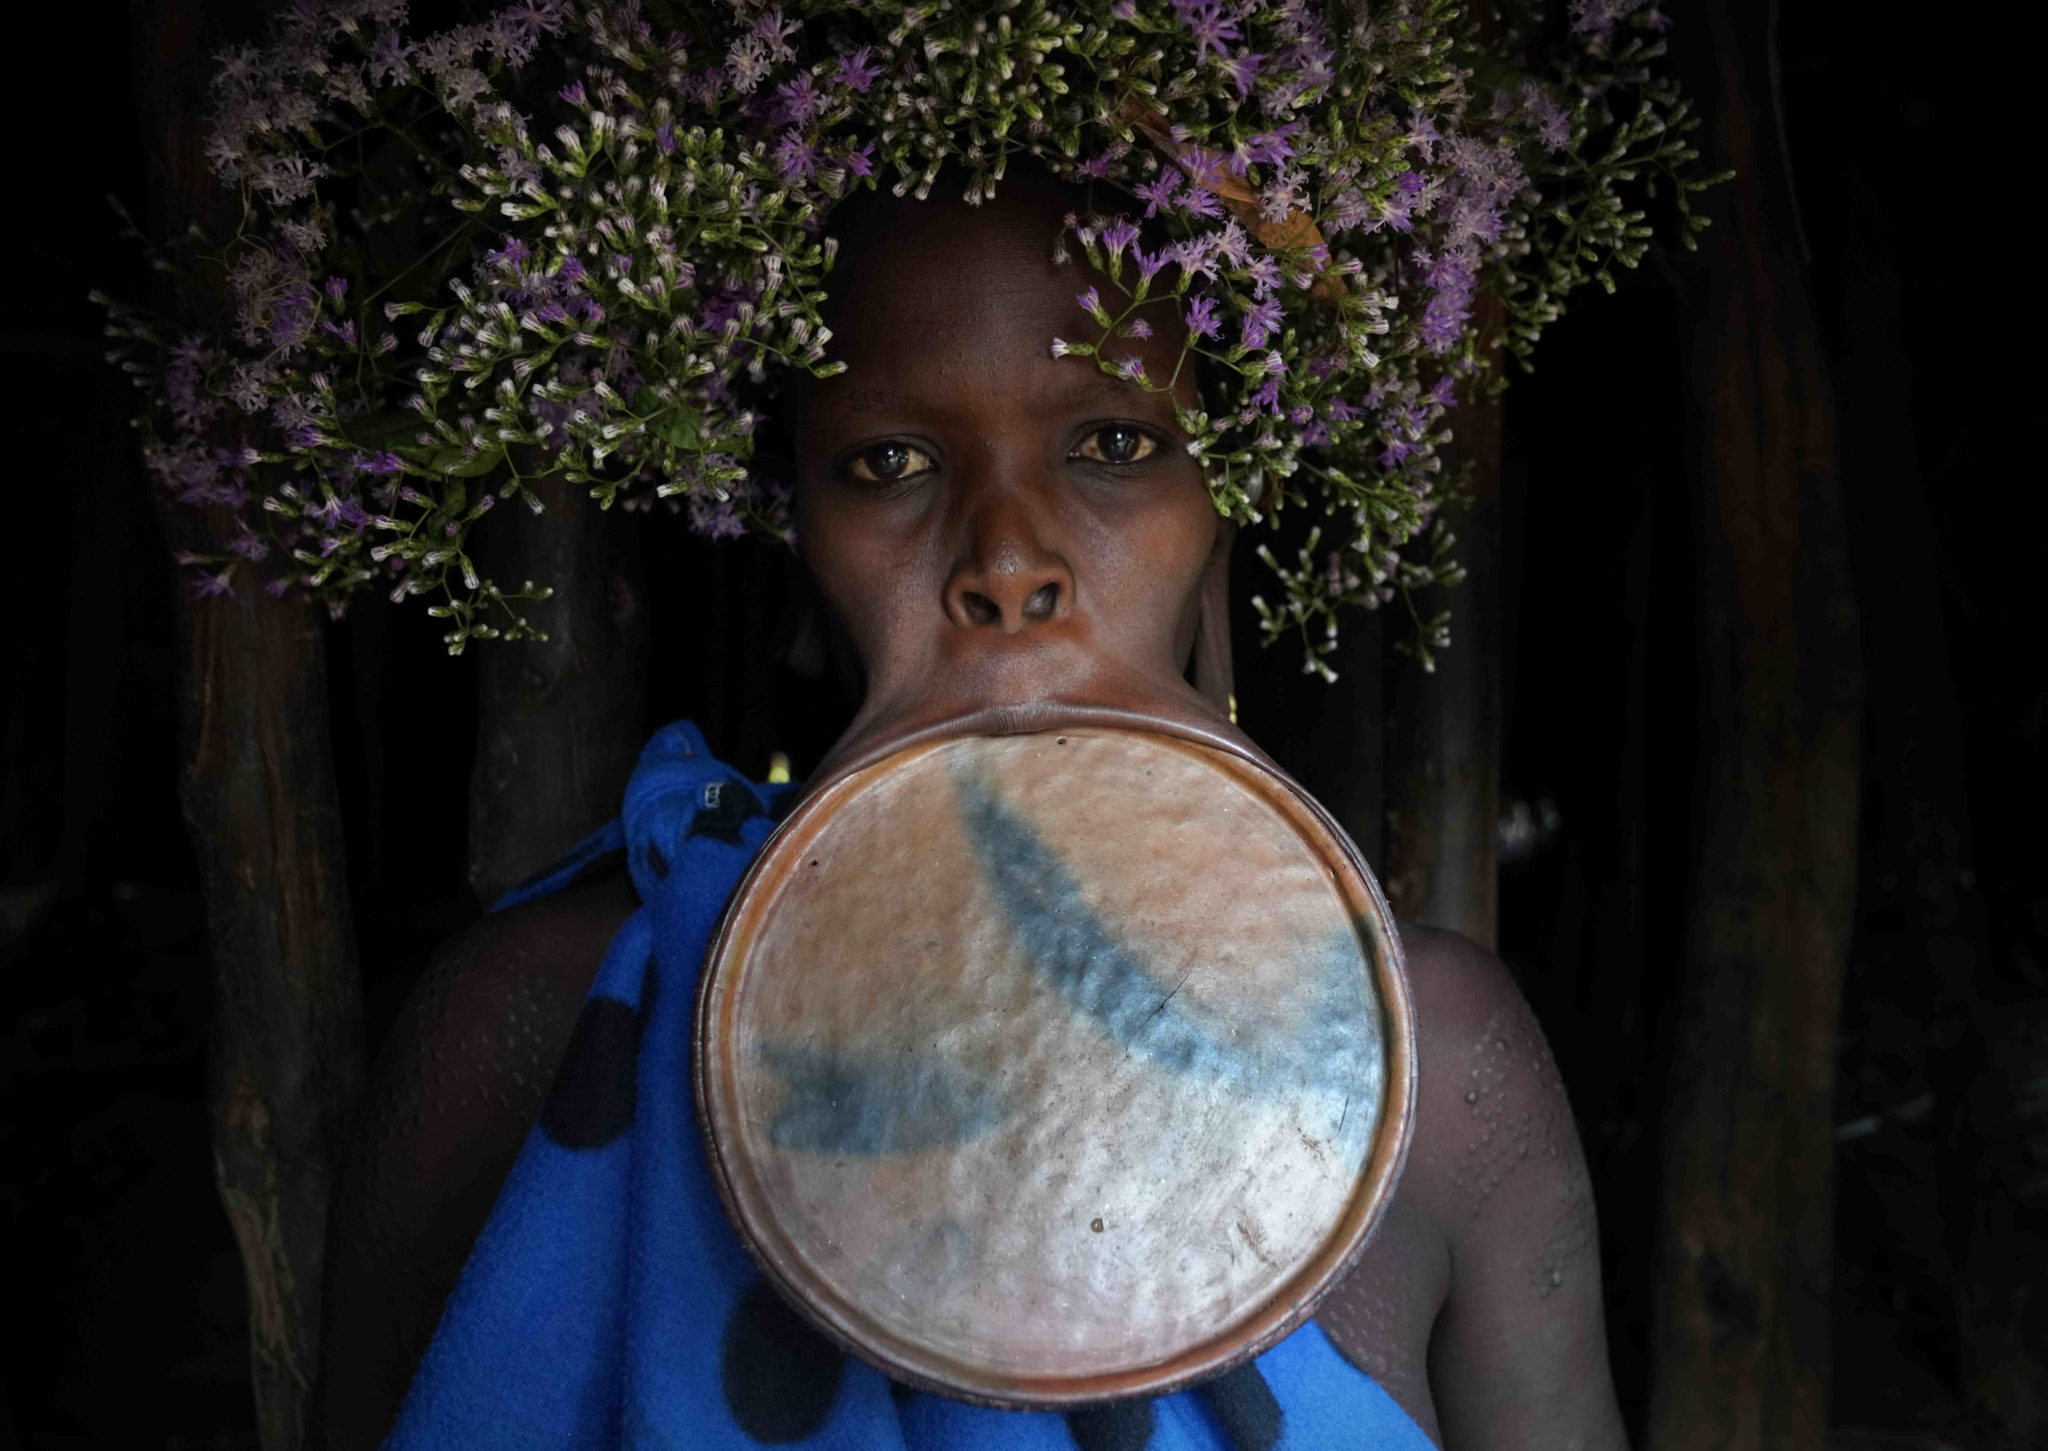 A Rare Look Inside A Tribe Where Women Wear Face Plates To Enhance Their Be...